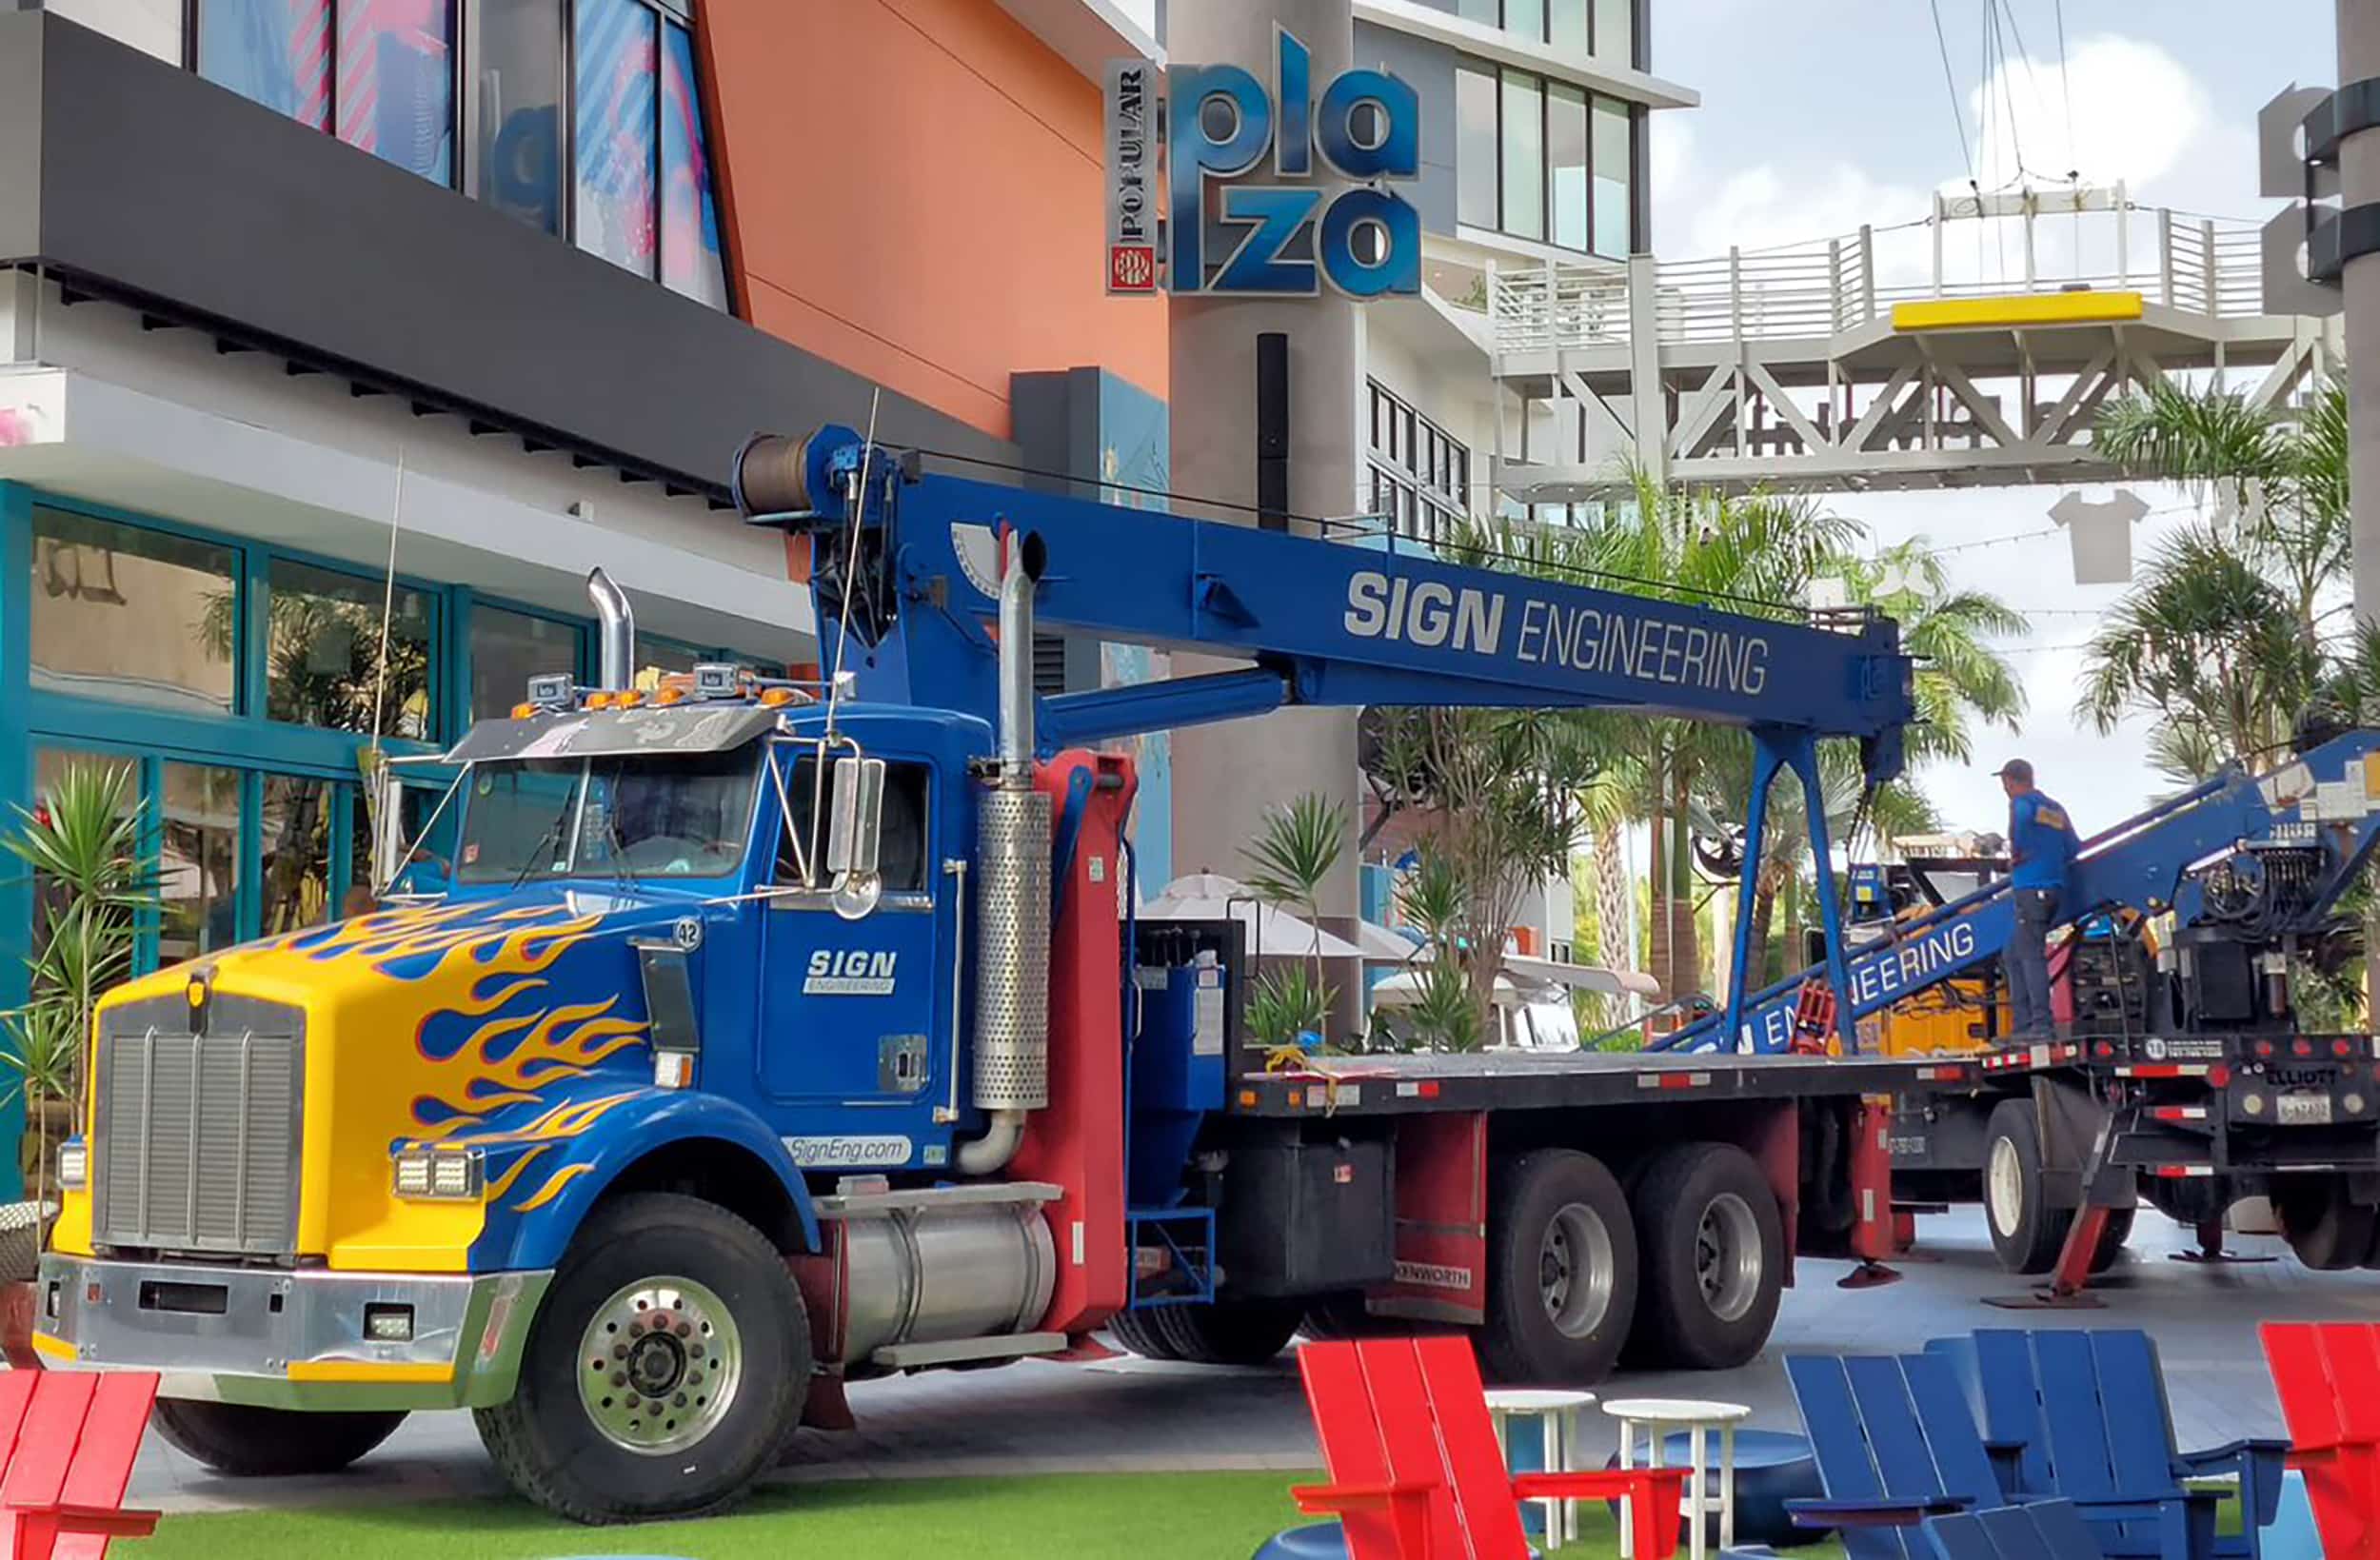 For Sign Engineering, the most interesting installs involve various crews with different types of equipment working together: work platforms (Elliott), lifting cranes (Manitex) and maybe a very large rented crane.